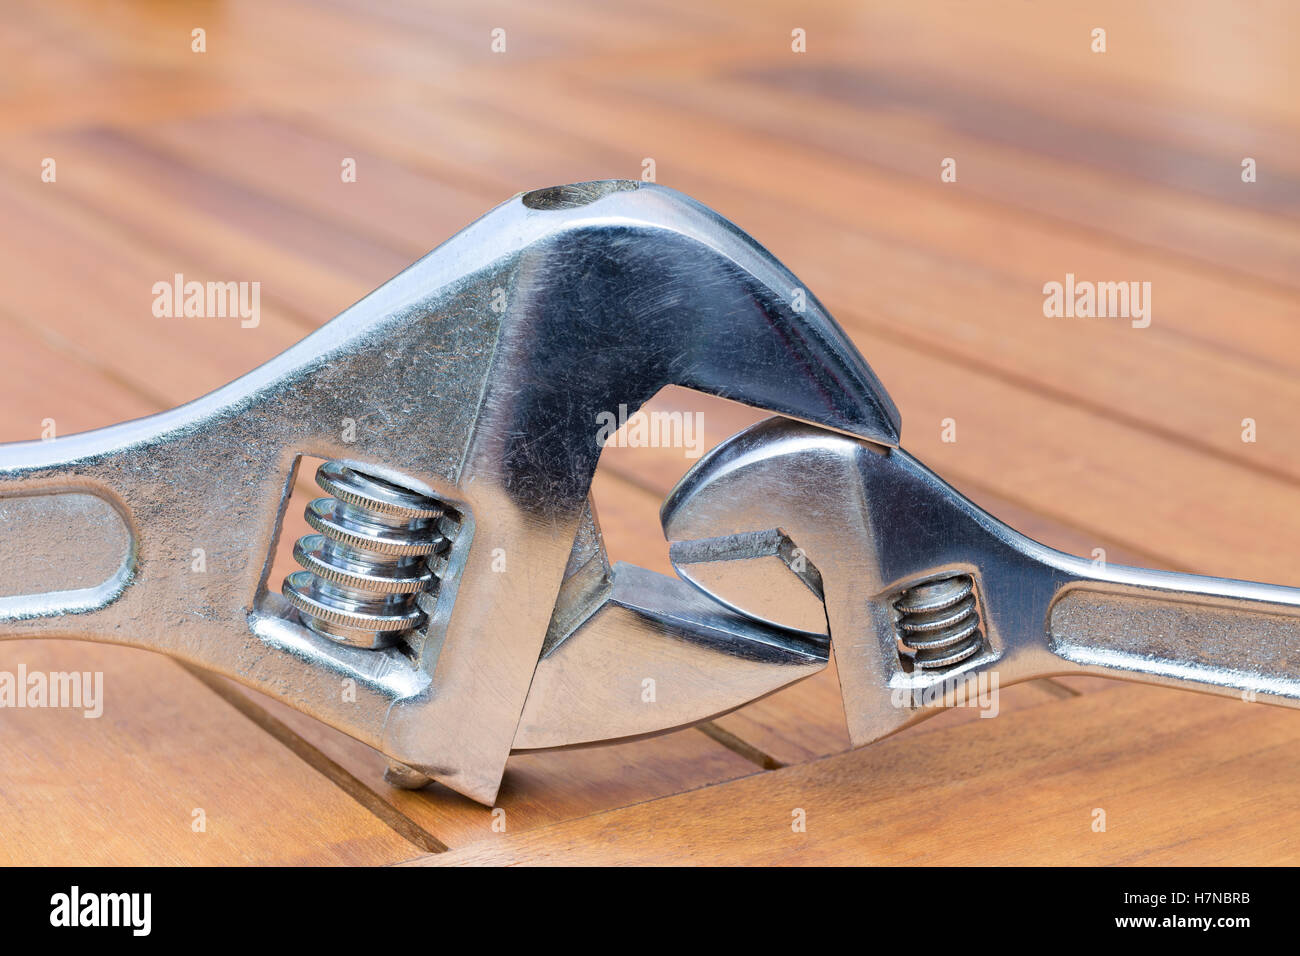 Big and little adjustable wrenches together on wooden table Stock Photo